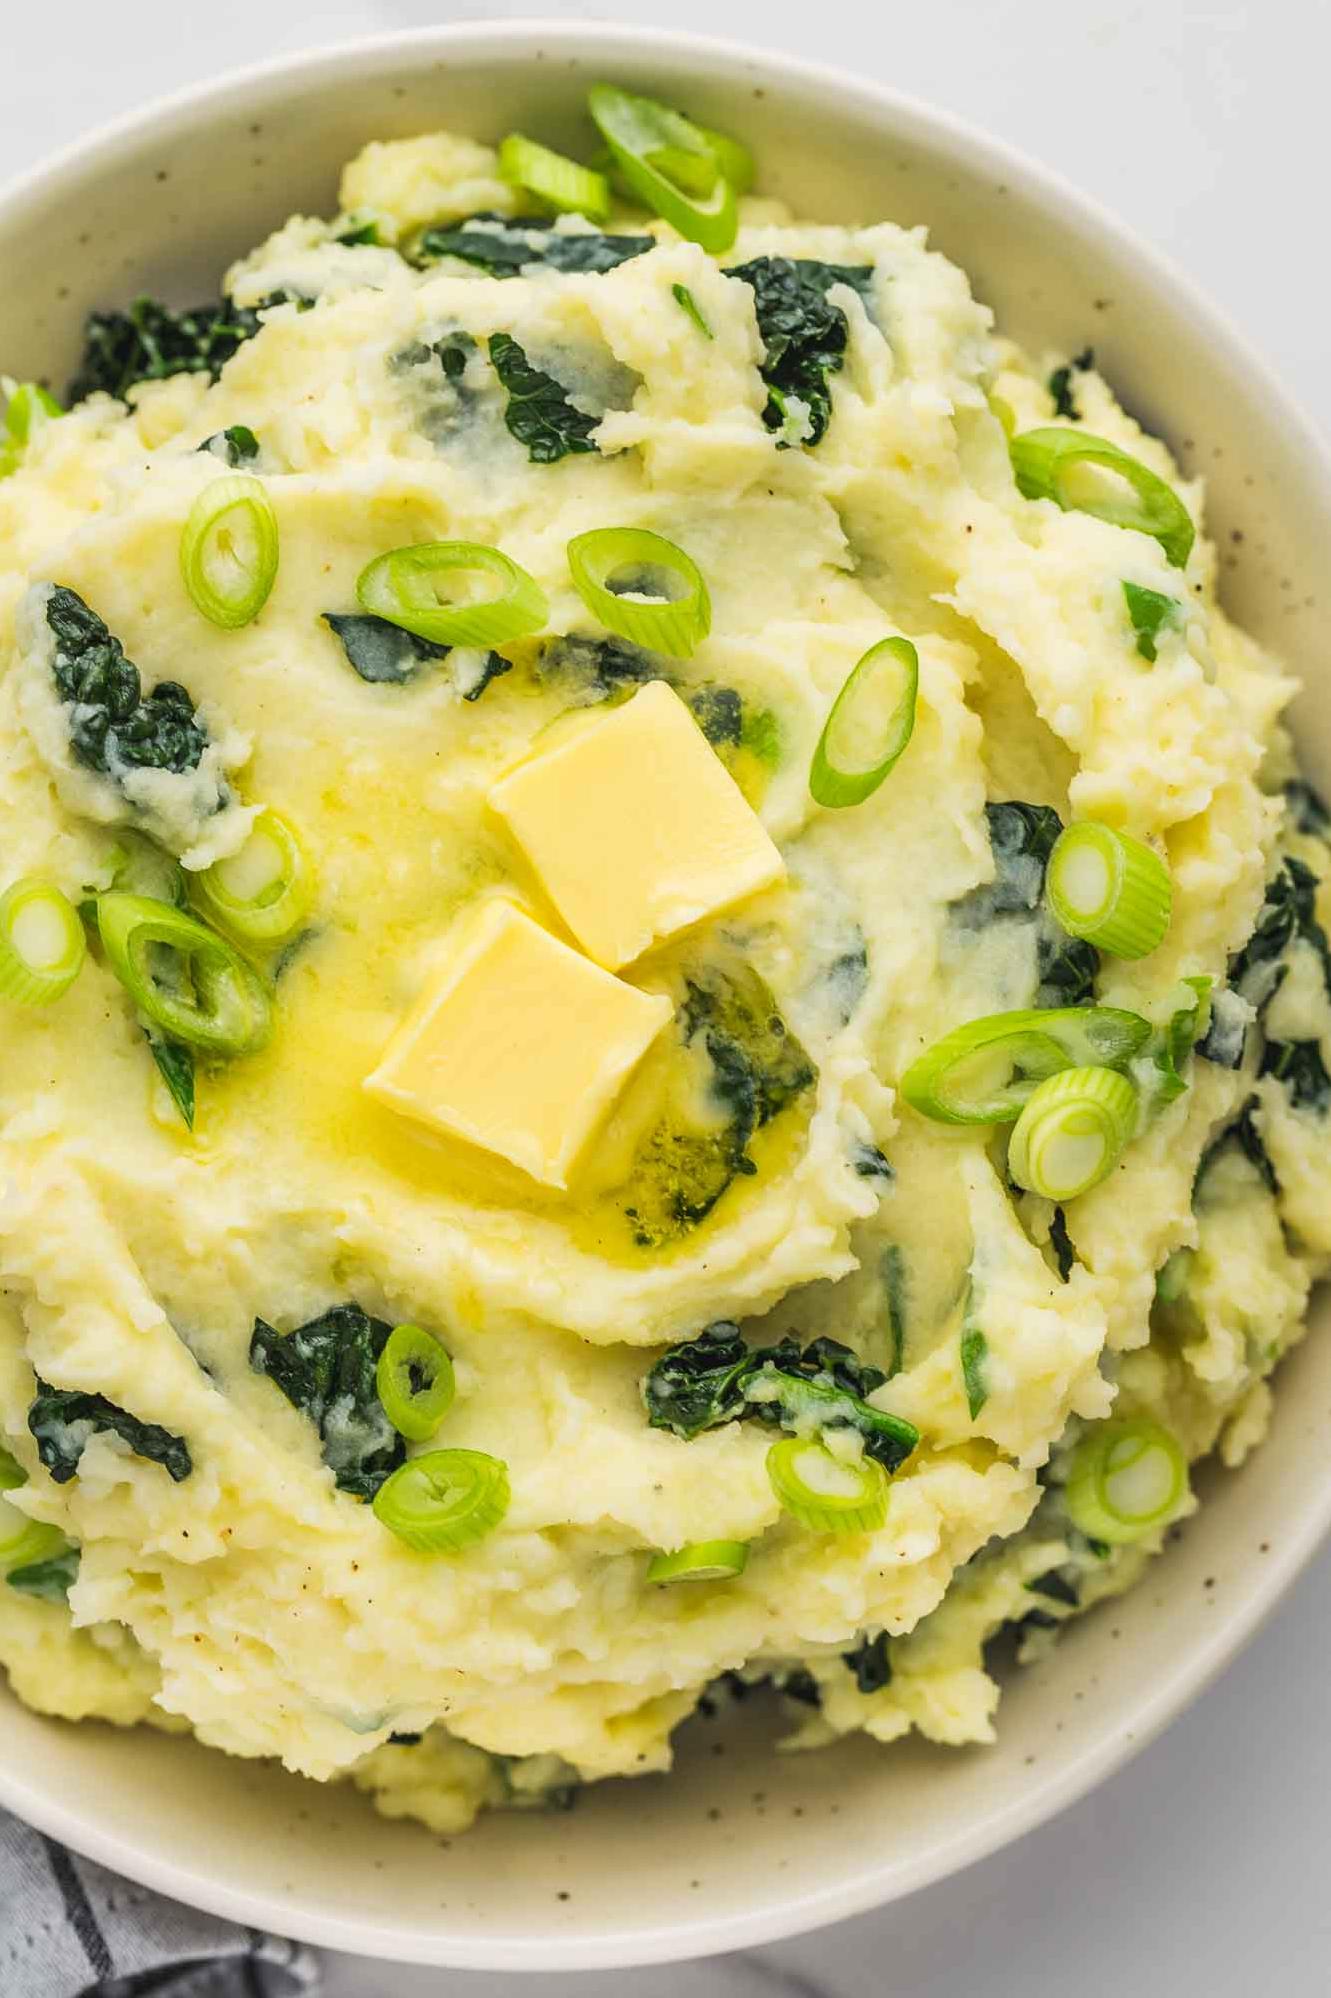  The rich green color of the kale adds a healthy touch to this indulgent dish